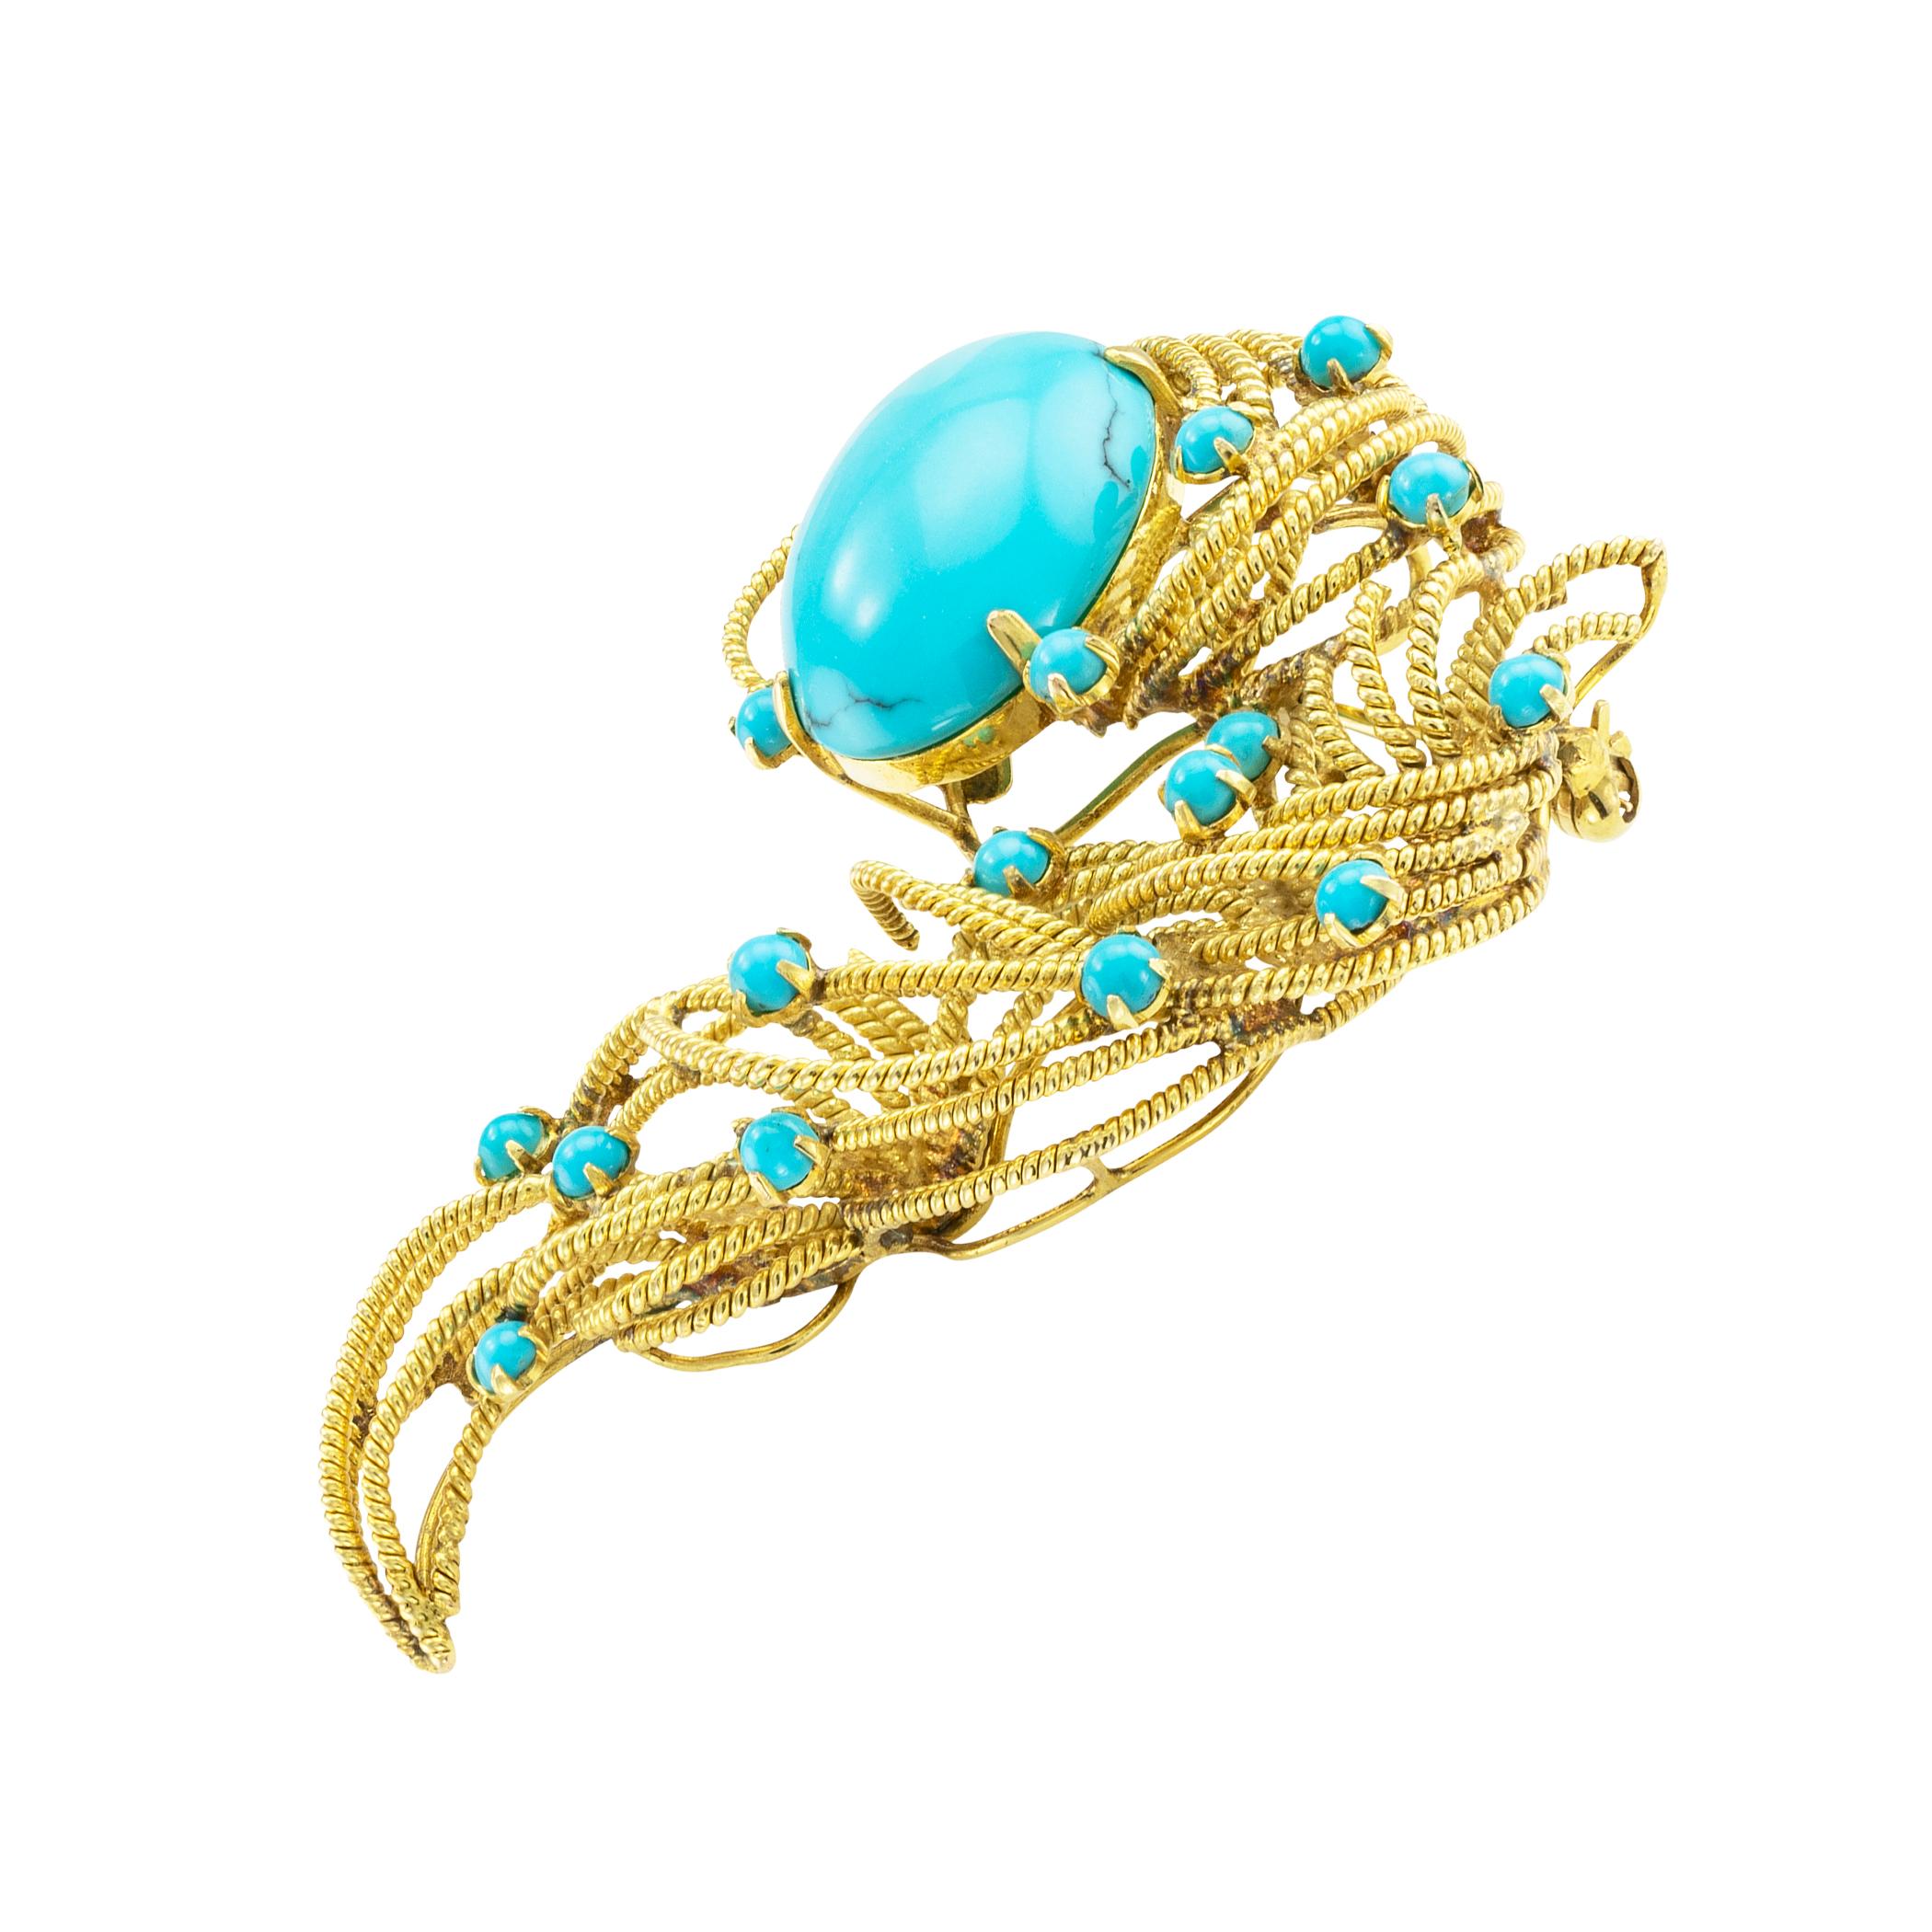 Cabochon Turquoise Yellow Gold Brooch Pendant For Sale